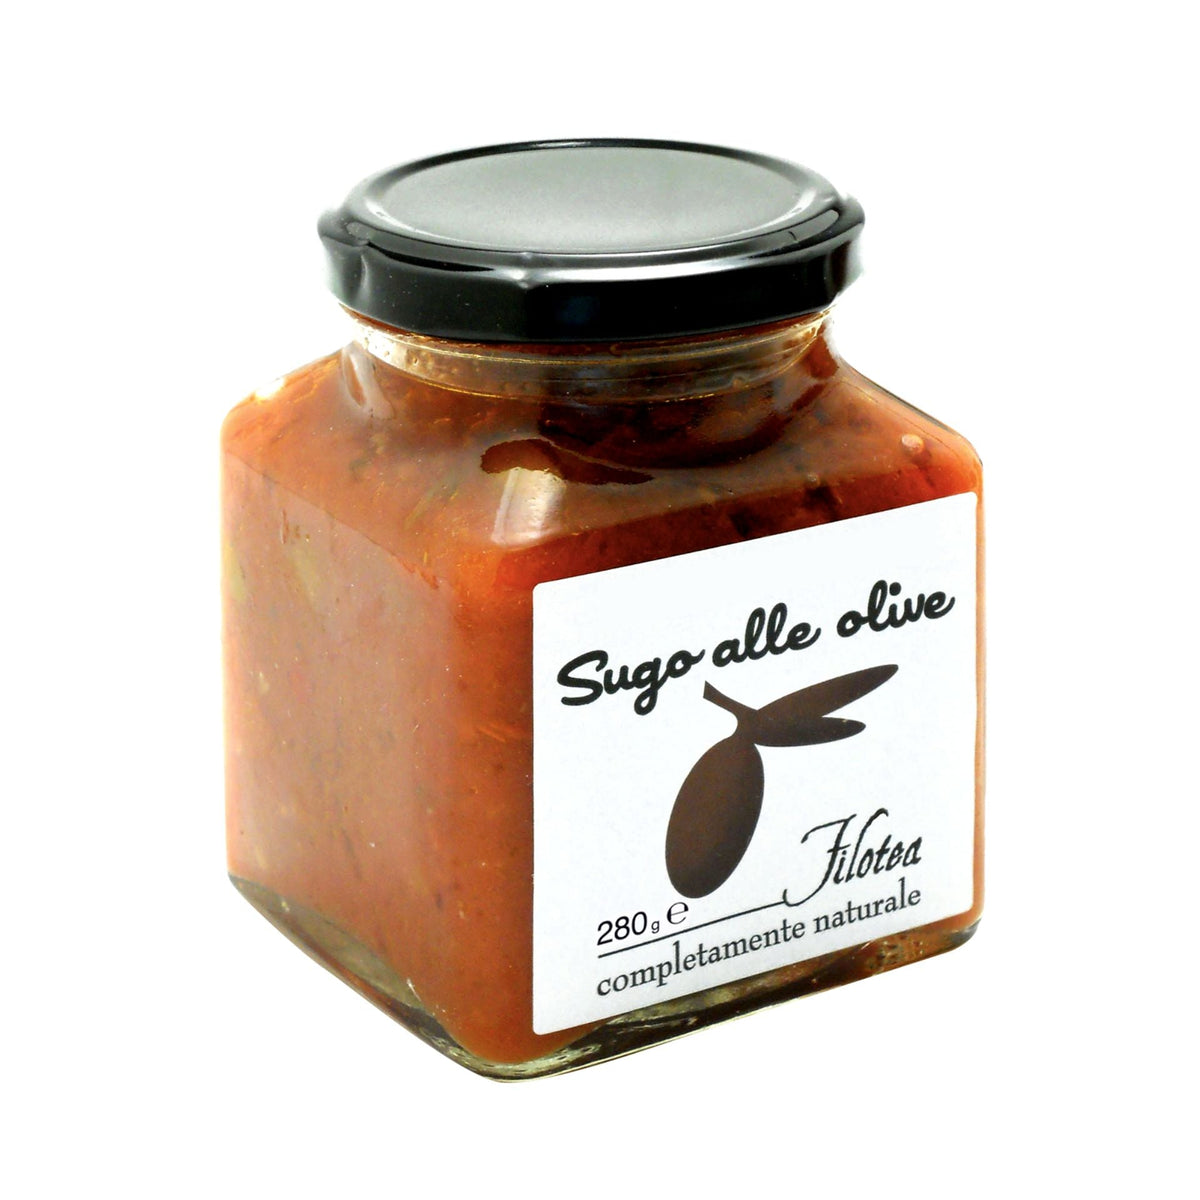 Filotea Filtotea Olive Pasta Sauce 280g  | Imported and distributed in the UK by Just Gourmet Foods